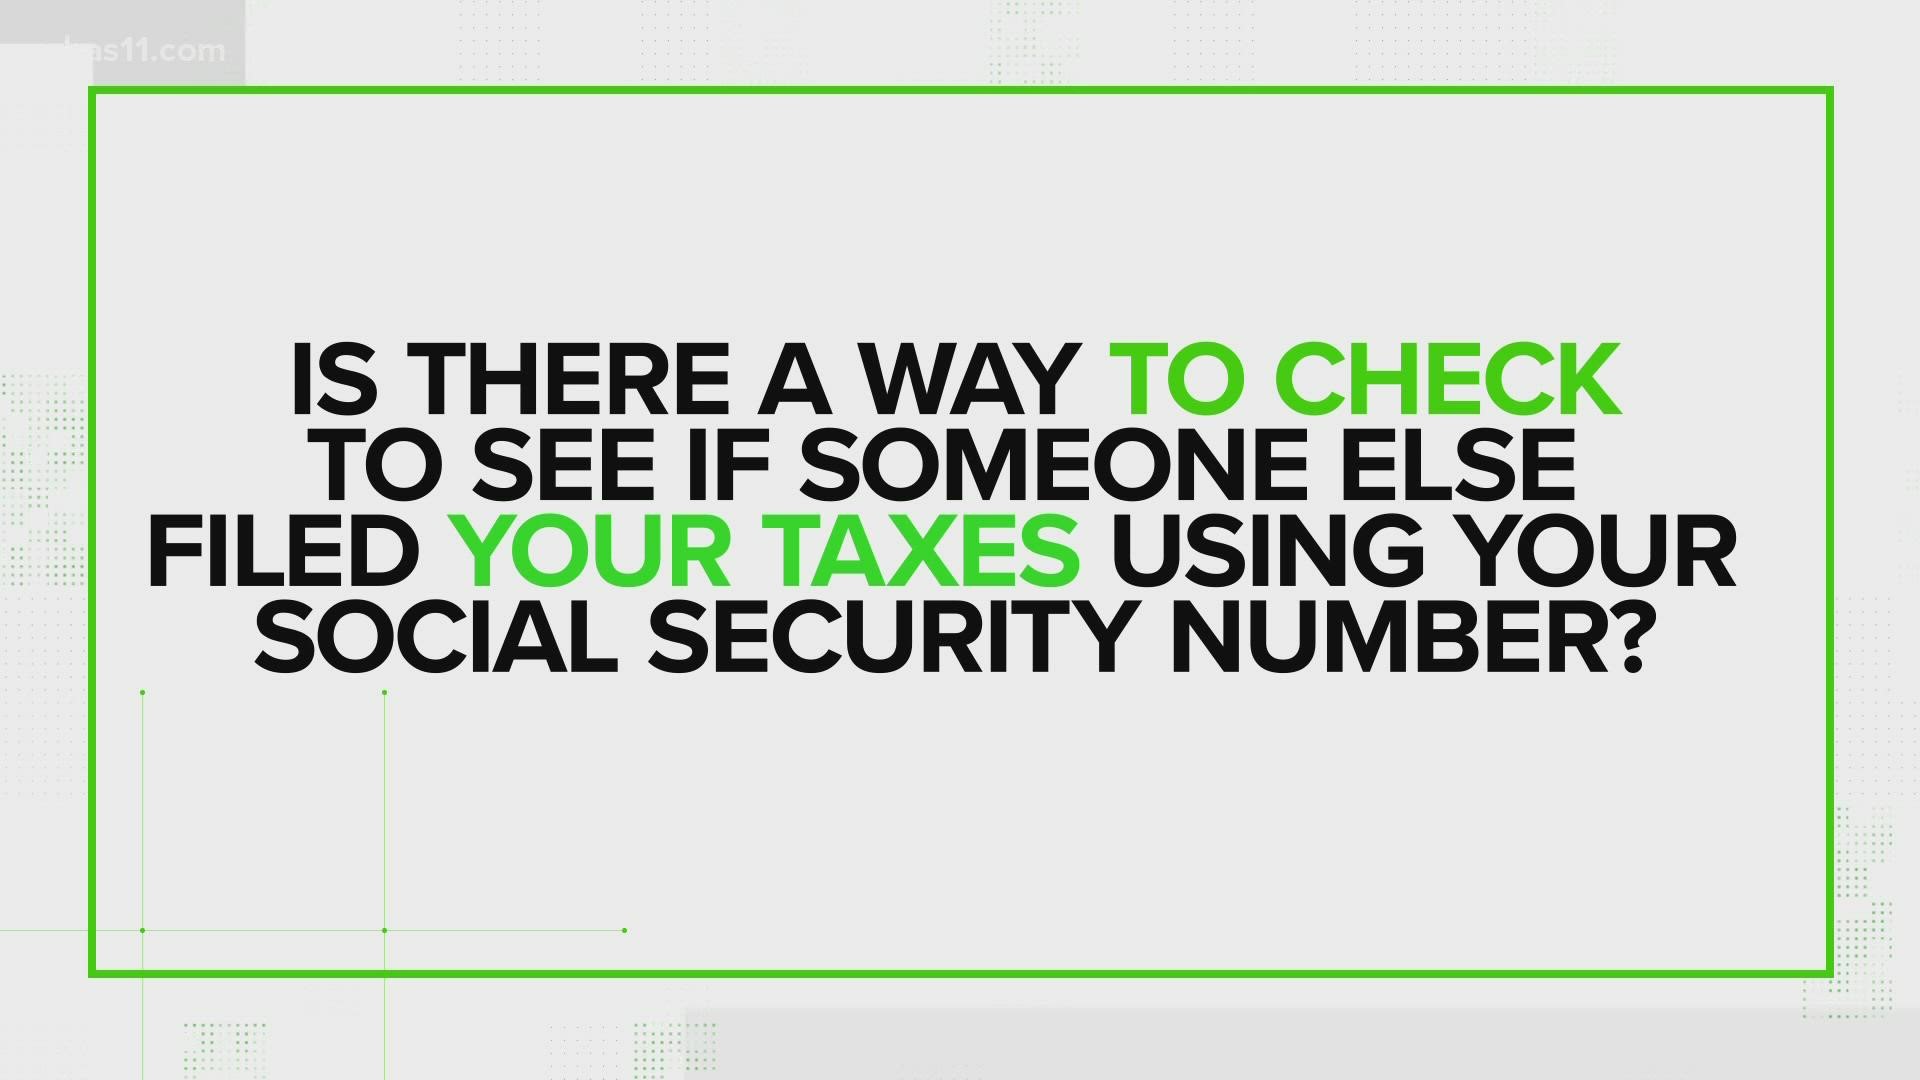 Something to be aware of this tax season is possible identity theft.